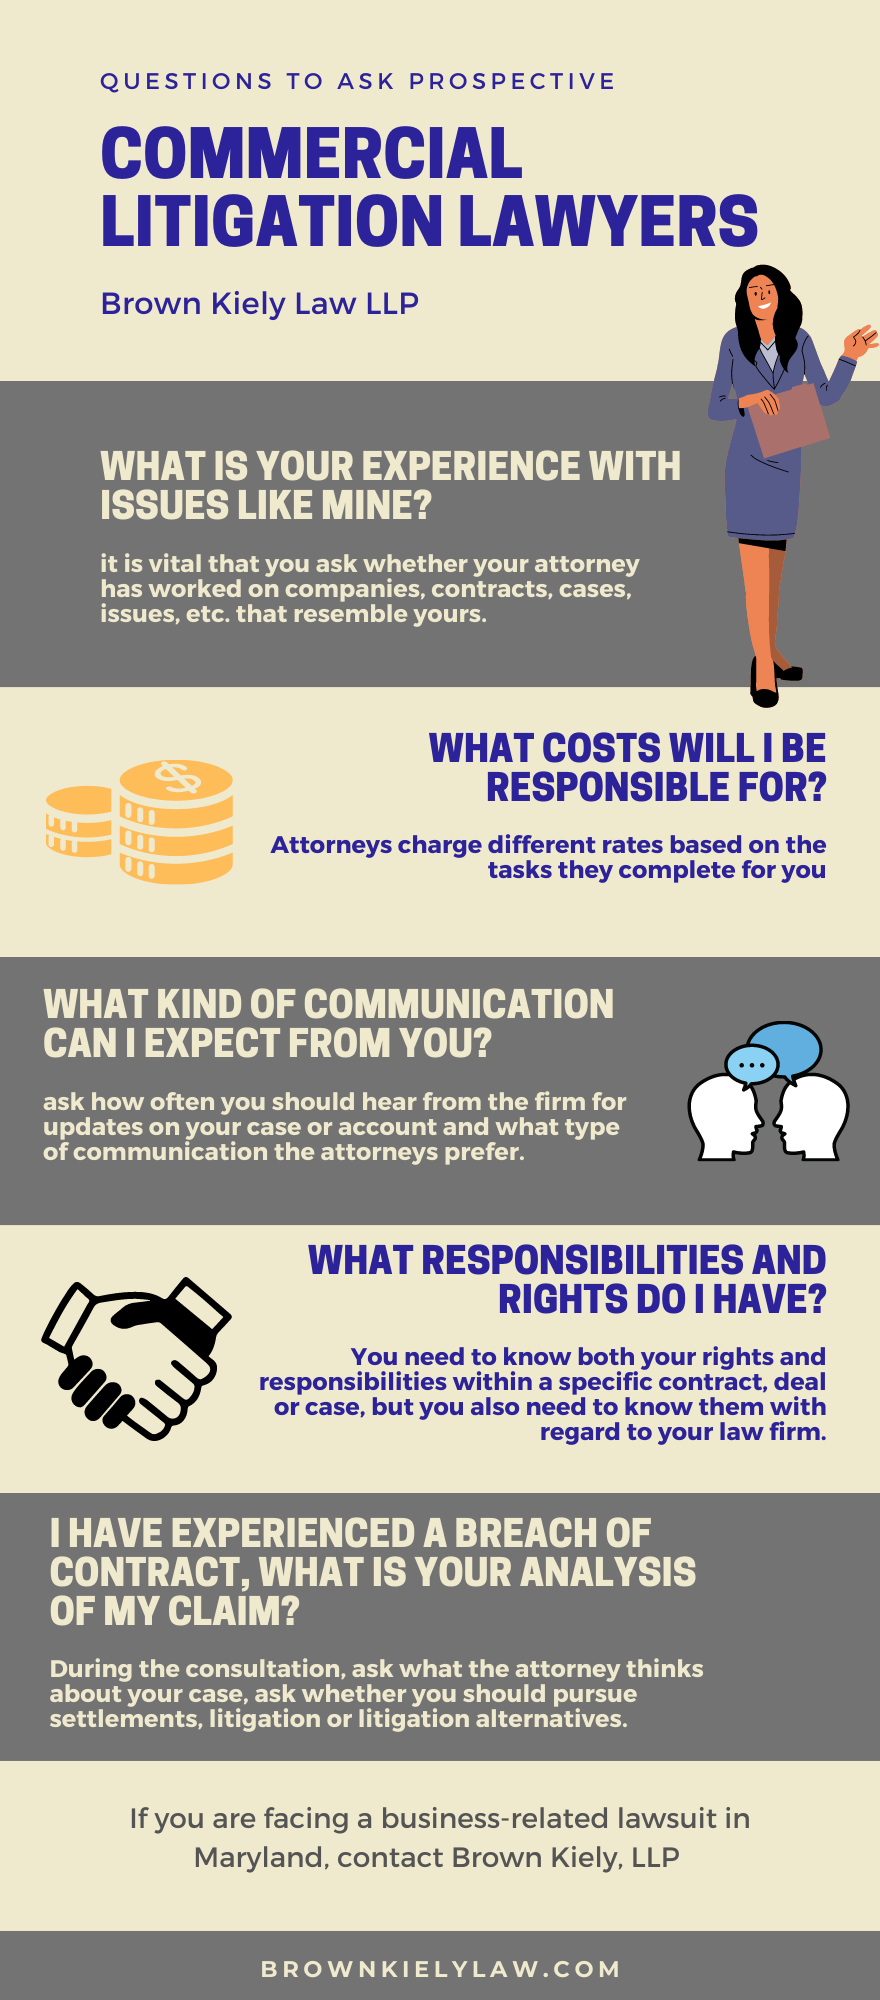 Questions To Ask Prospective Commercial Litigation Lawyers Infographic